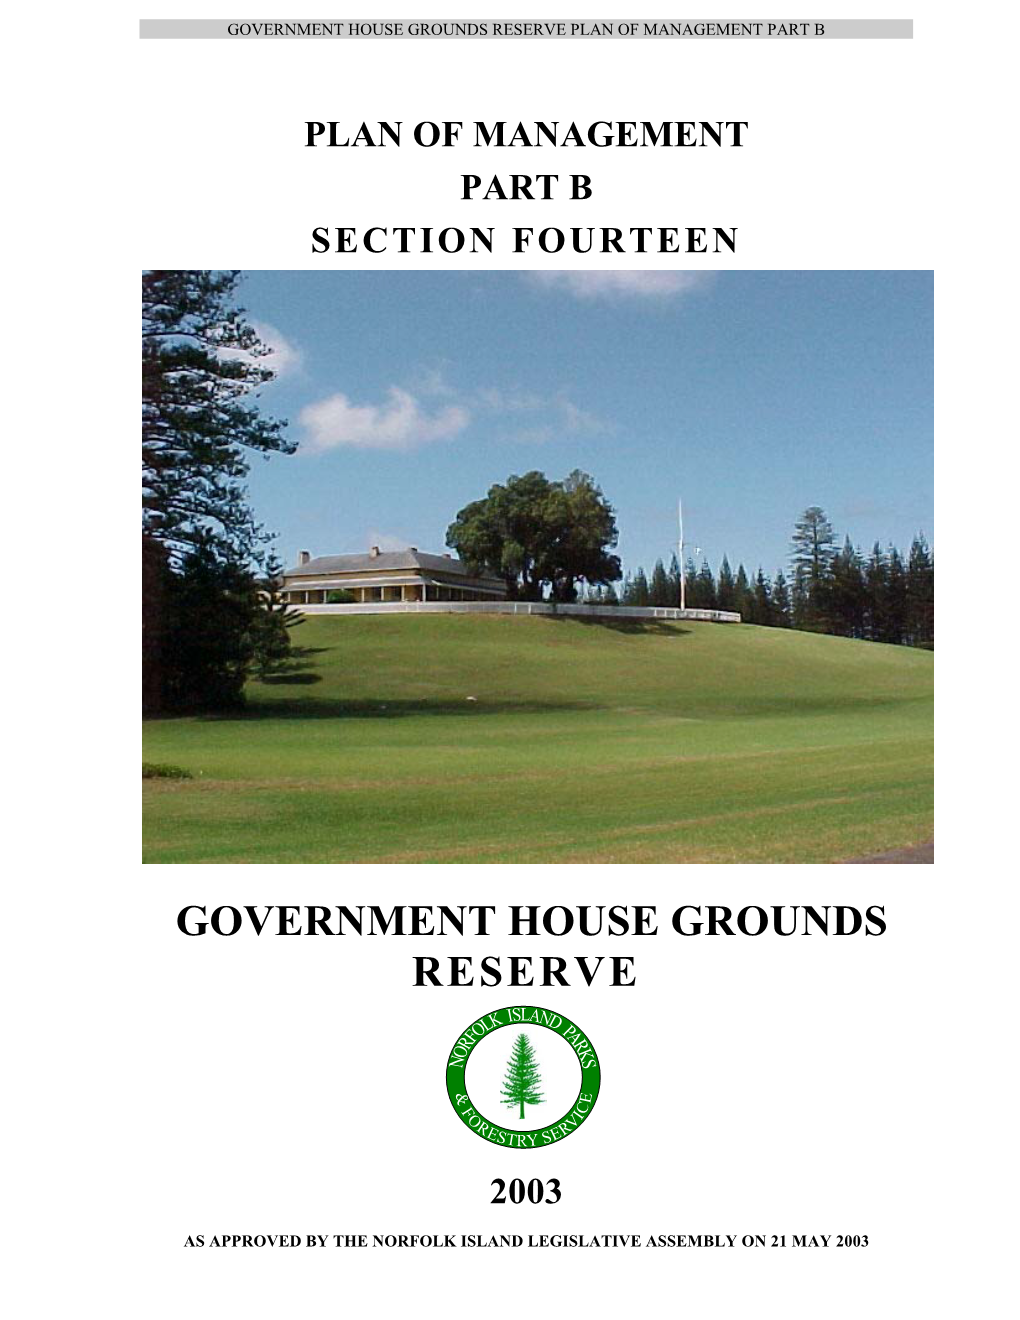 Government House Grounds Reserve Plan of Management Part B